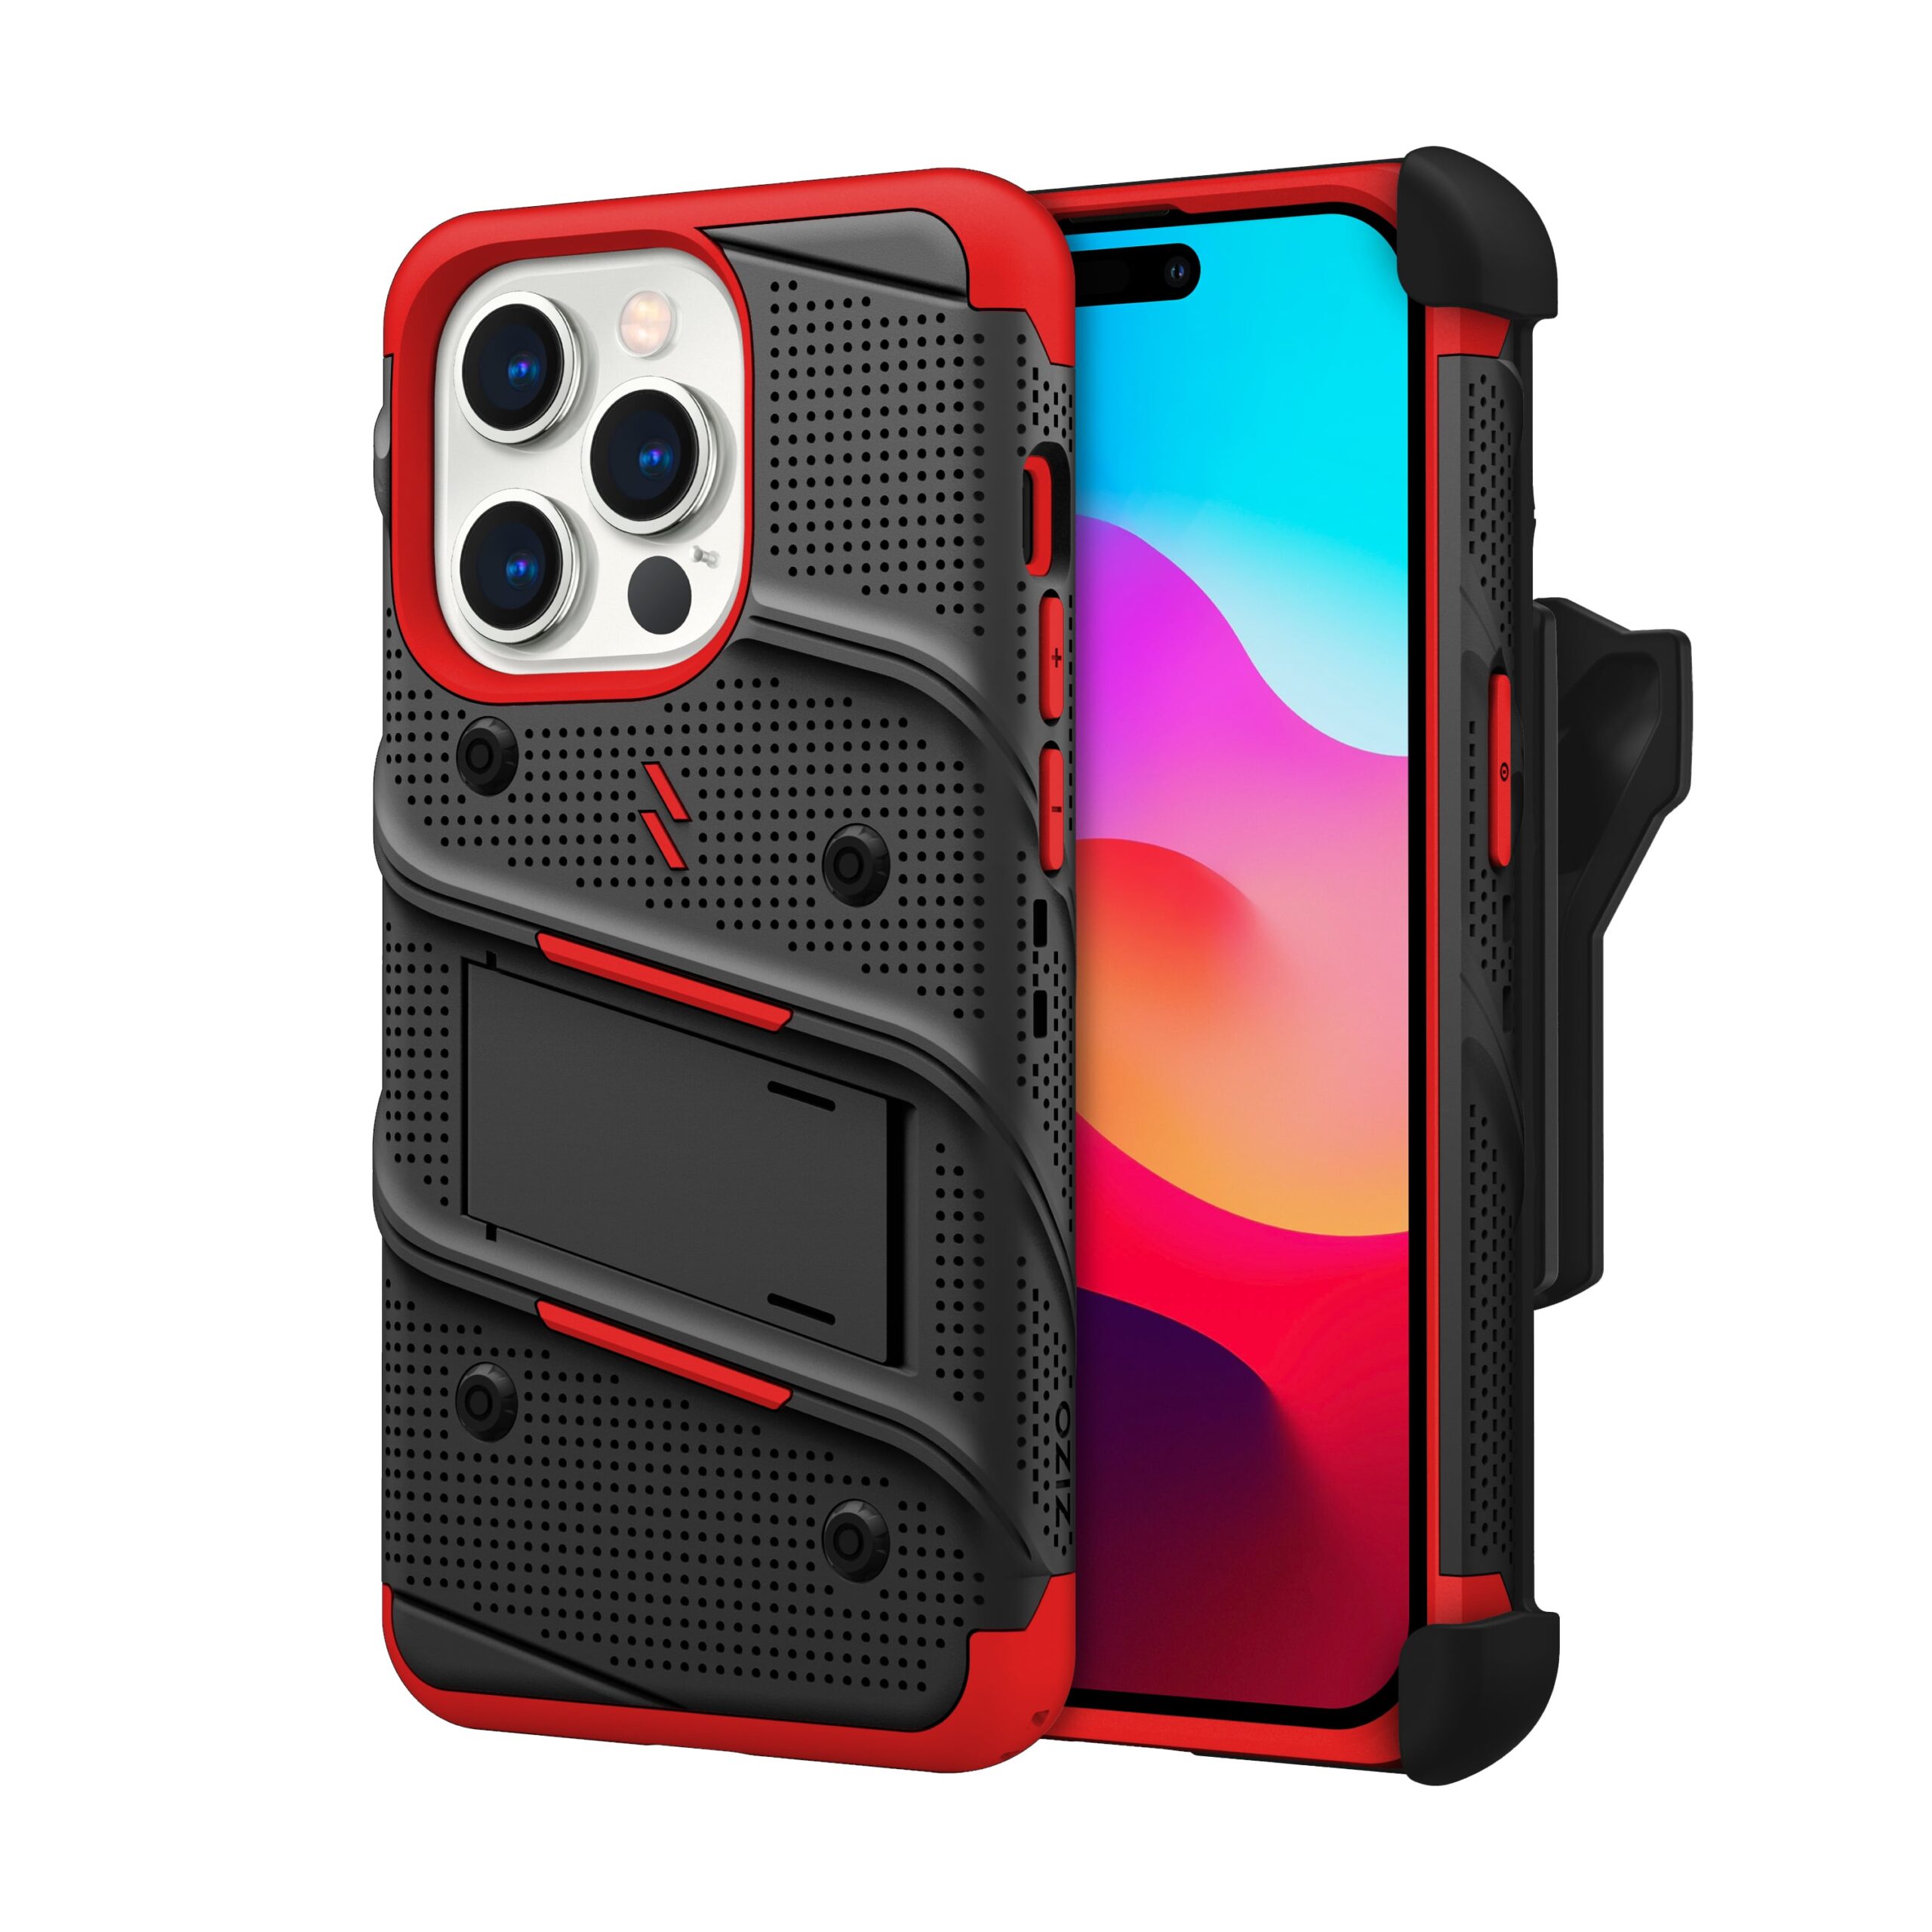 Zizo Bolt Bundle Apple iPhone 15 Pro Holster Case with Tempered Glass, Kickstand & Lanyard - Black/Red